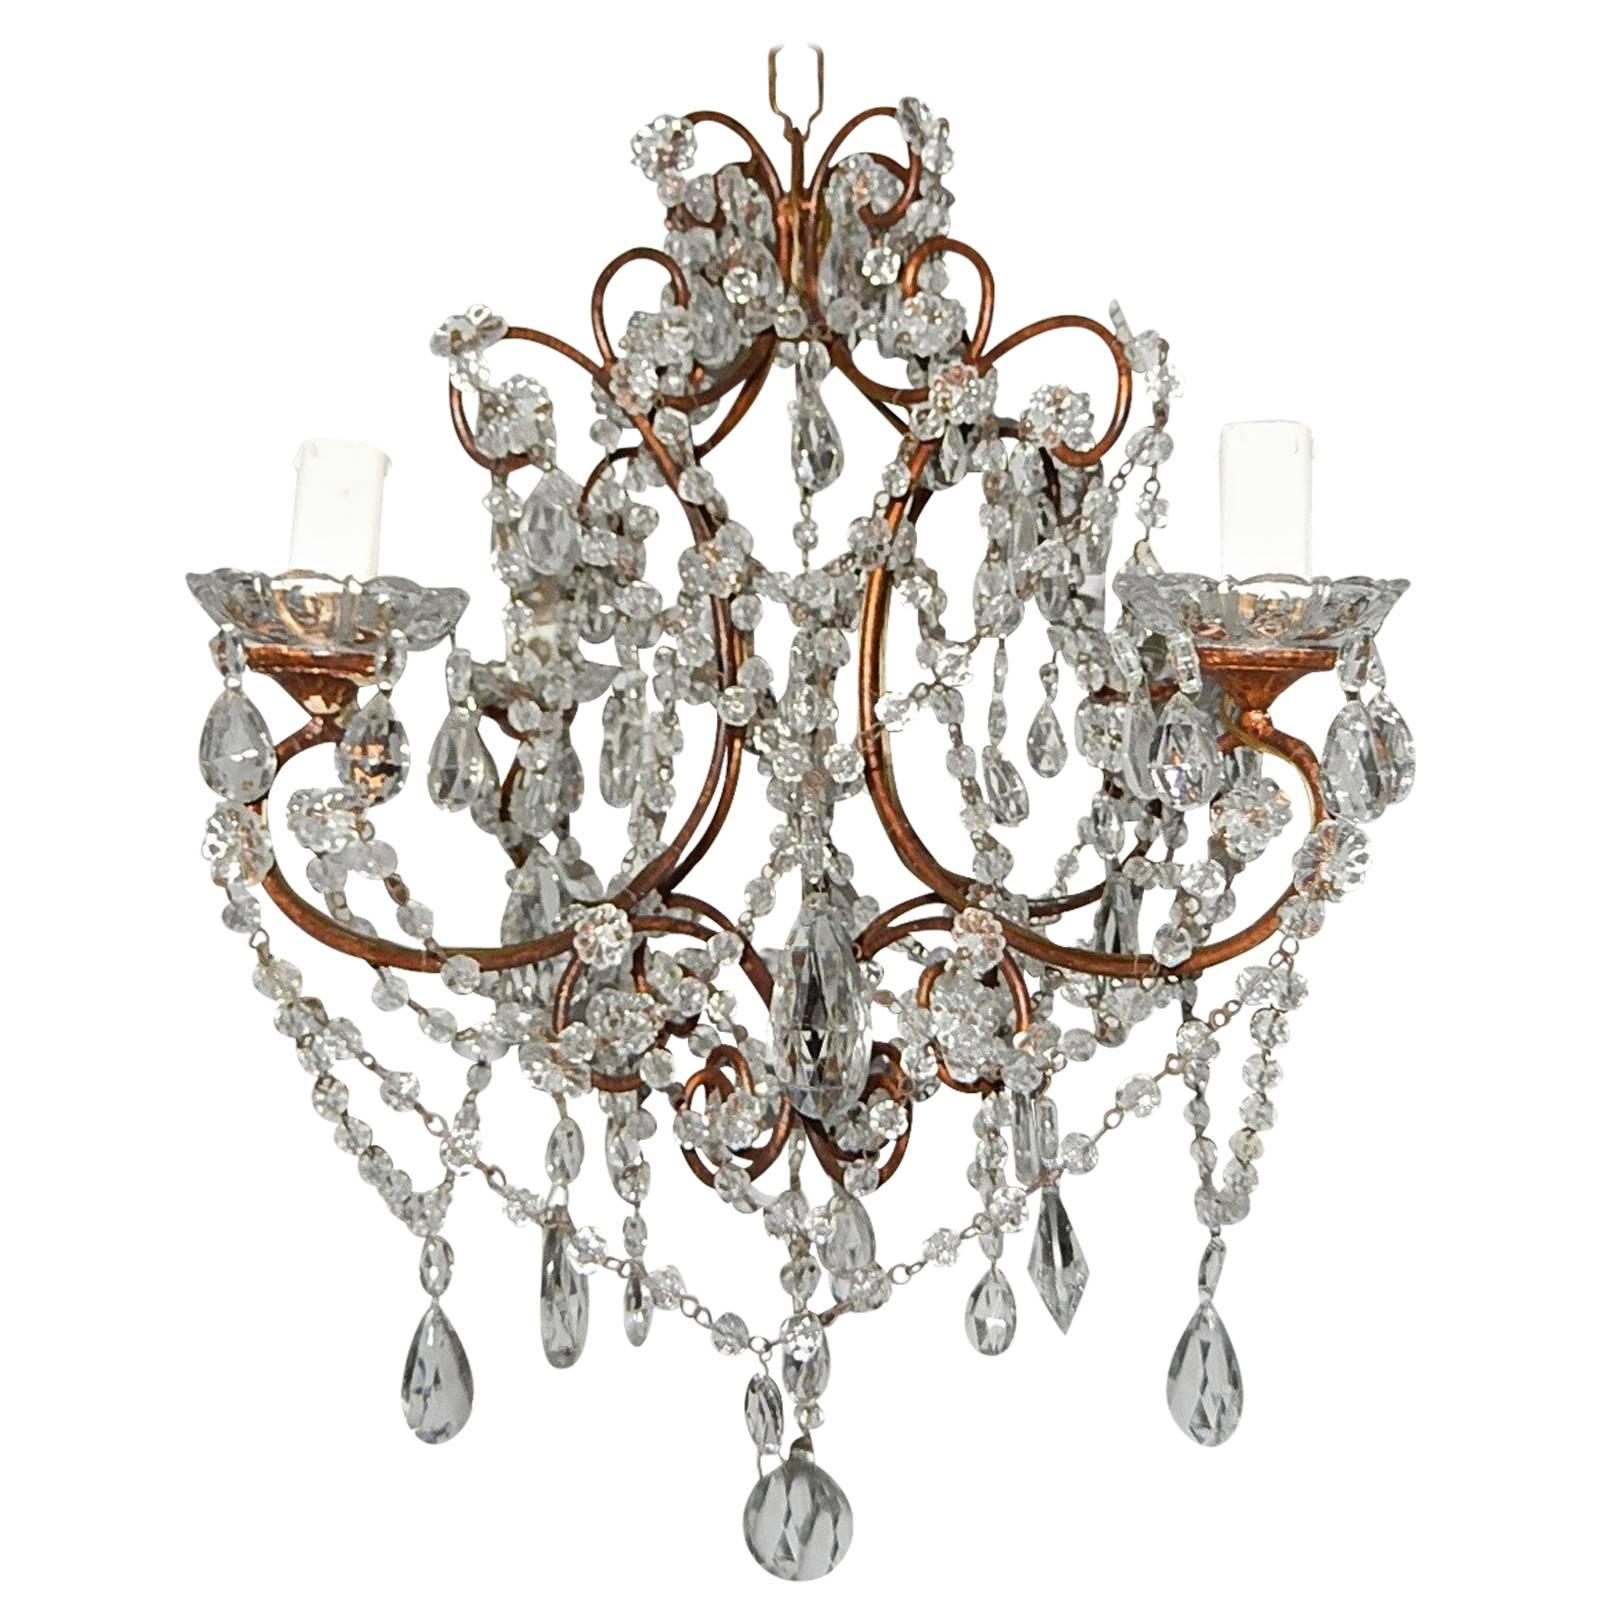 1920, French, Swags and Crystal Prisms Chandelier